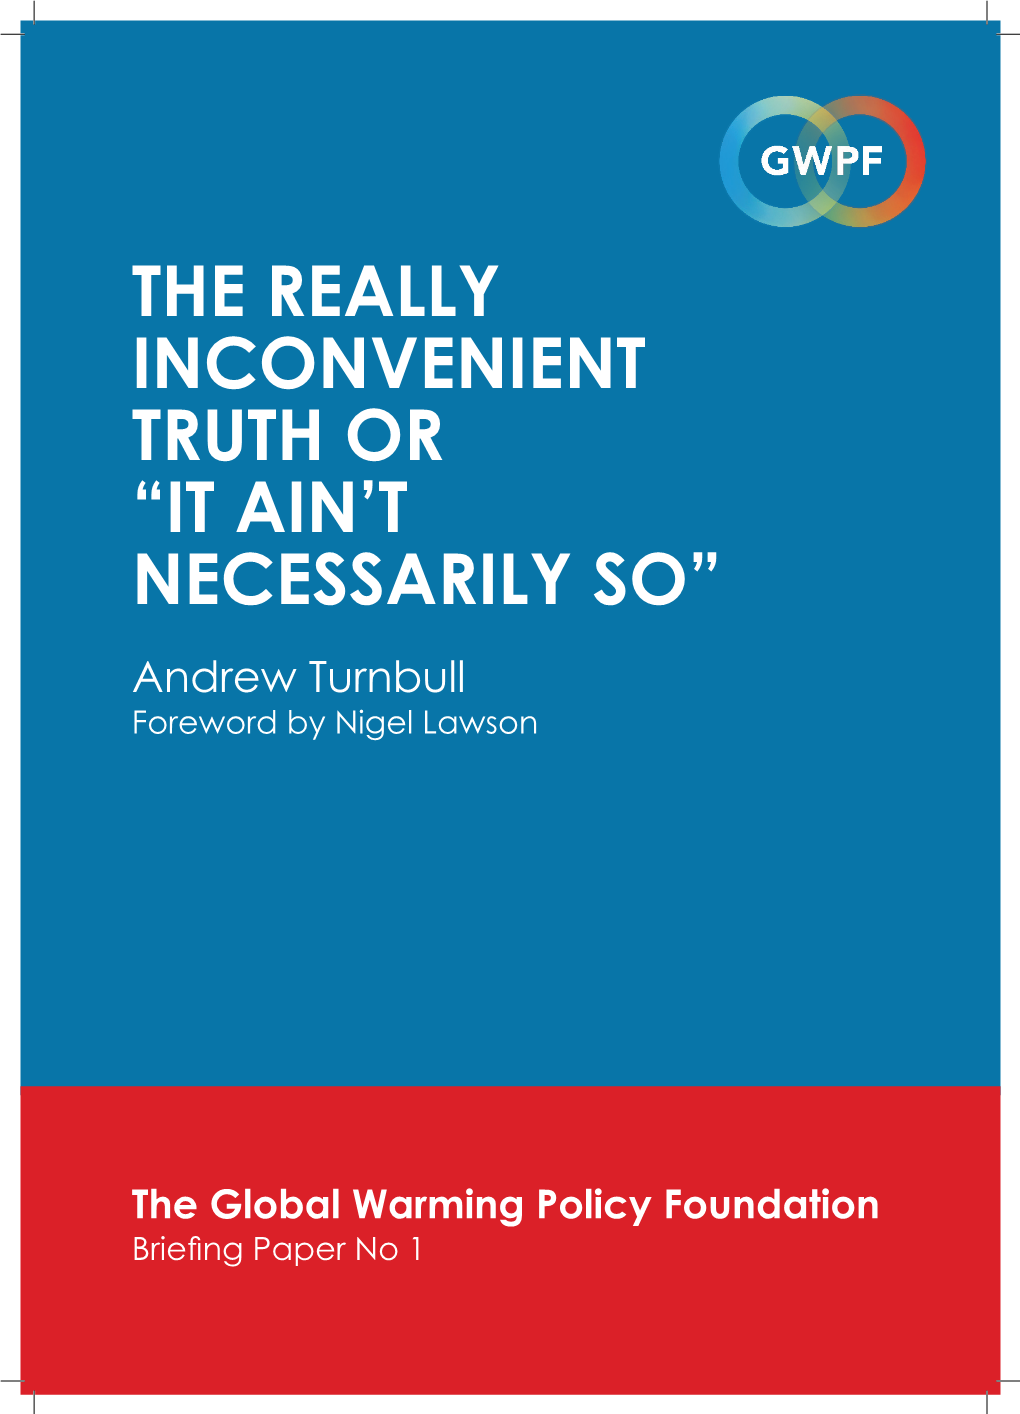 The Really Inconvenient Truth Or “It Ain’T Necessarily So” Andrew Turnbull Foreword by Nigel Lawson